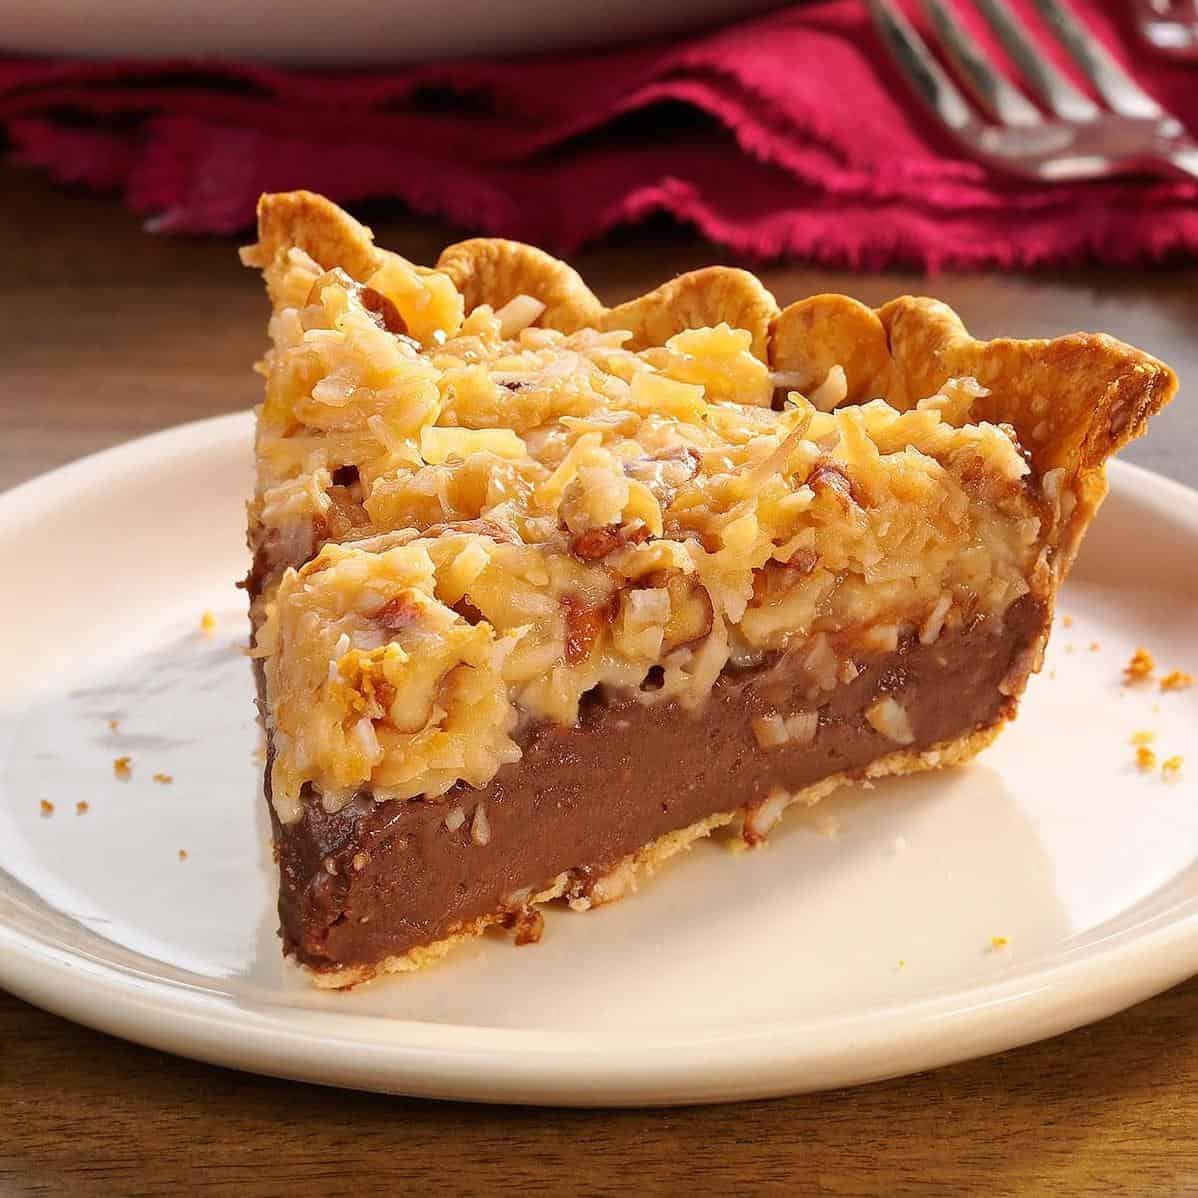  Who needs a special occasion when you can make this delicious German Sweet Chocolate Pie any day of the week?